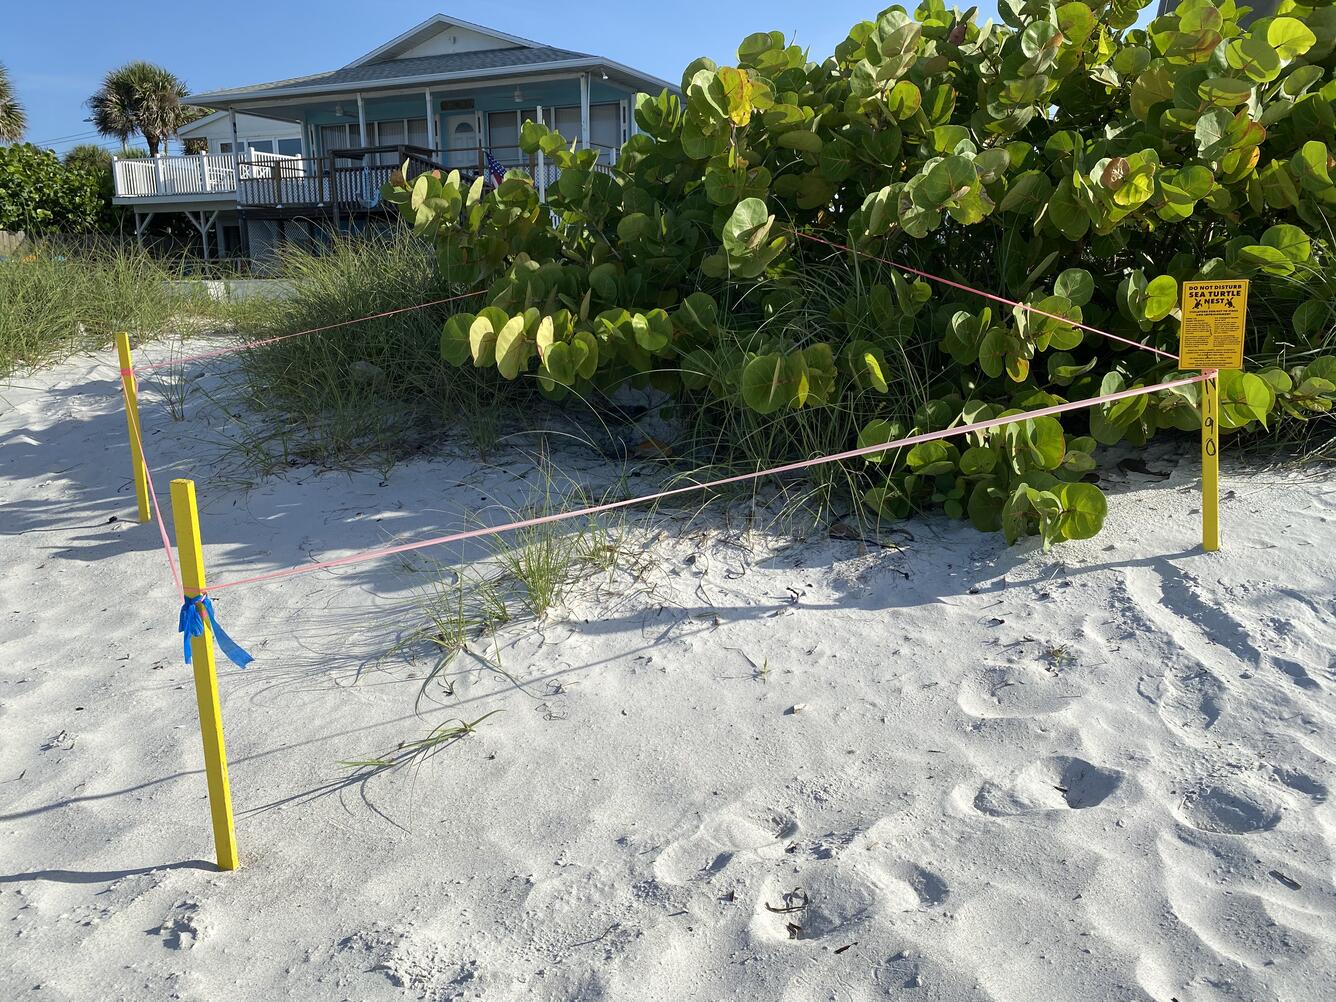 four posts in the sand connected by yellow flagging tape mark a sea turtle nest on a beach near vegetation